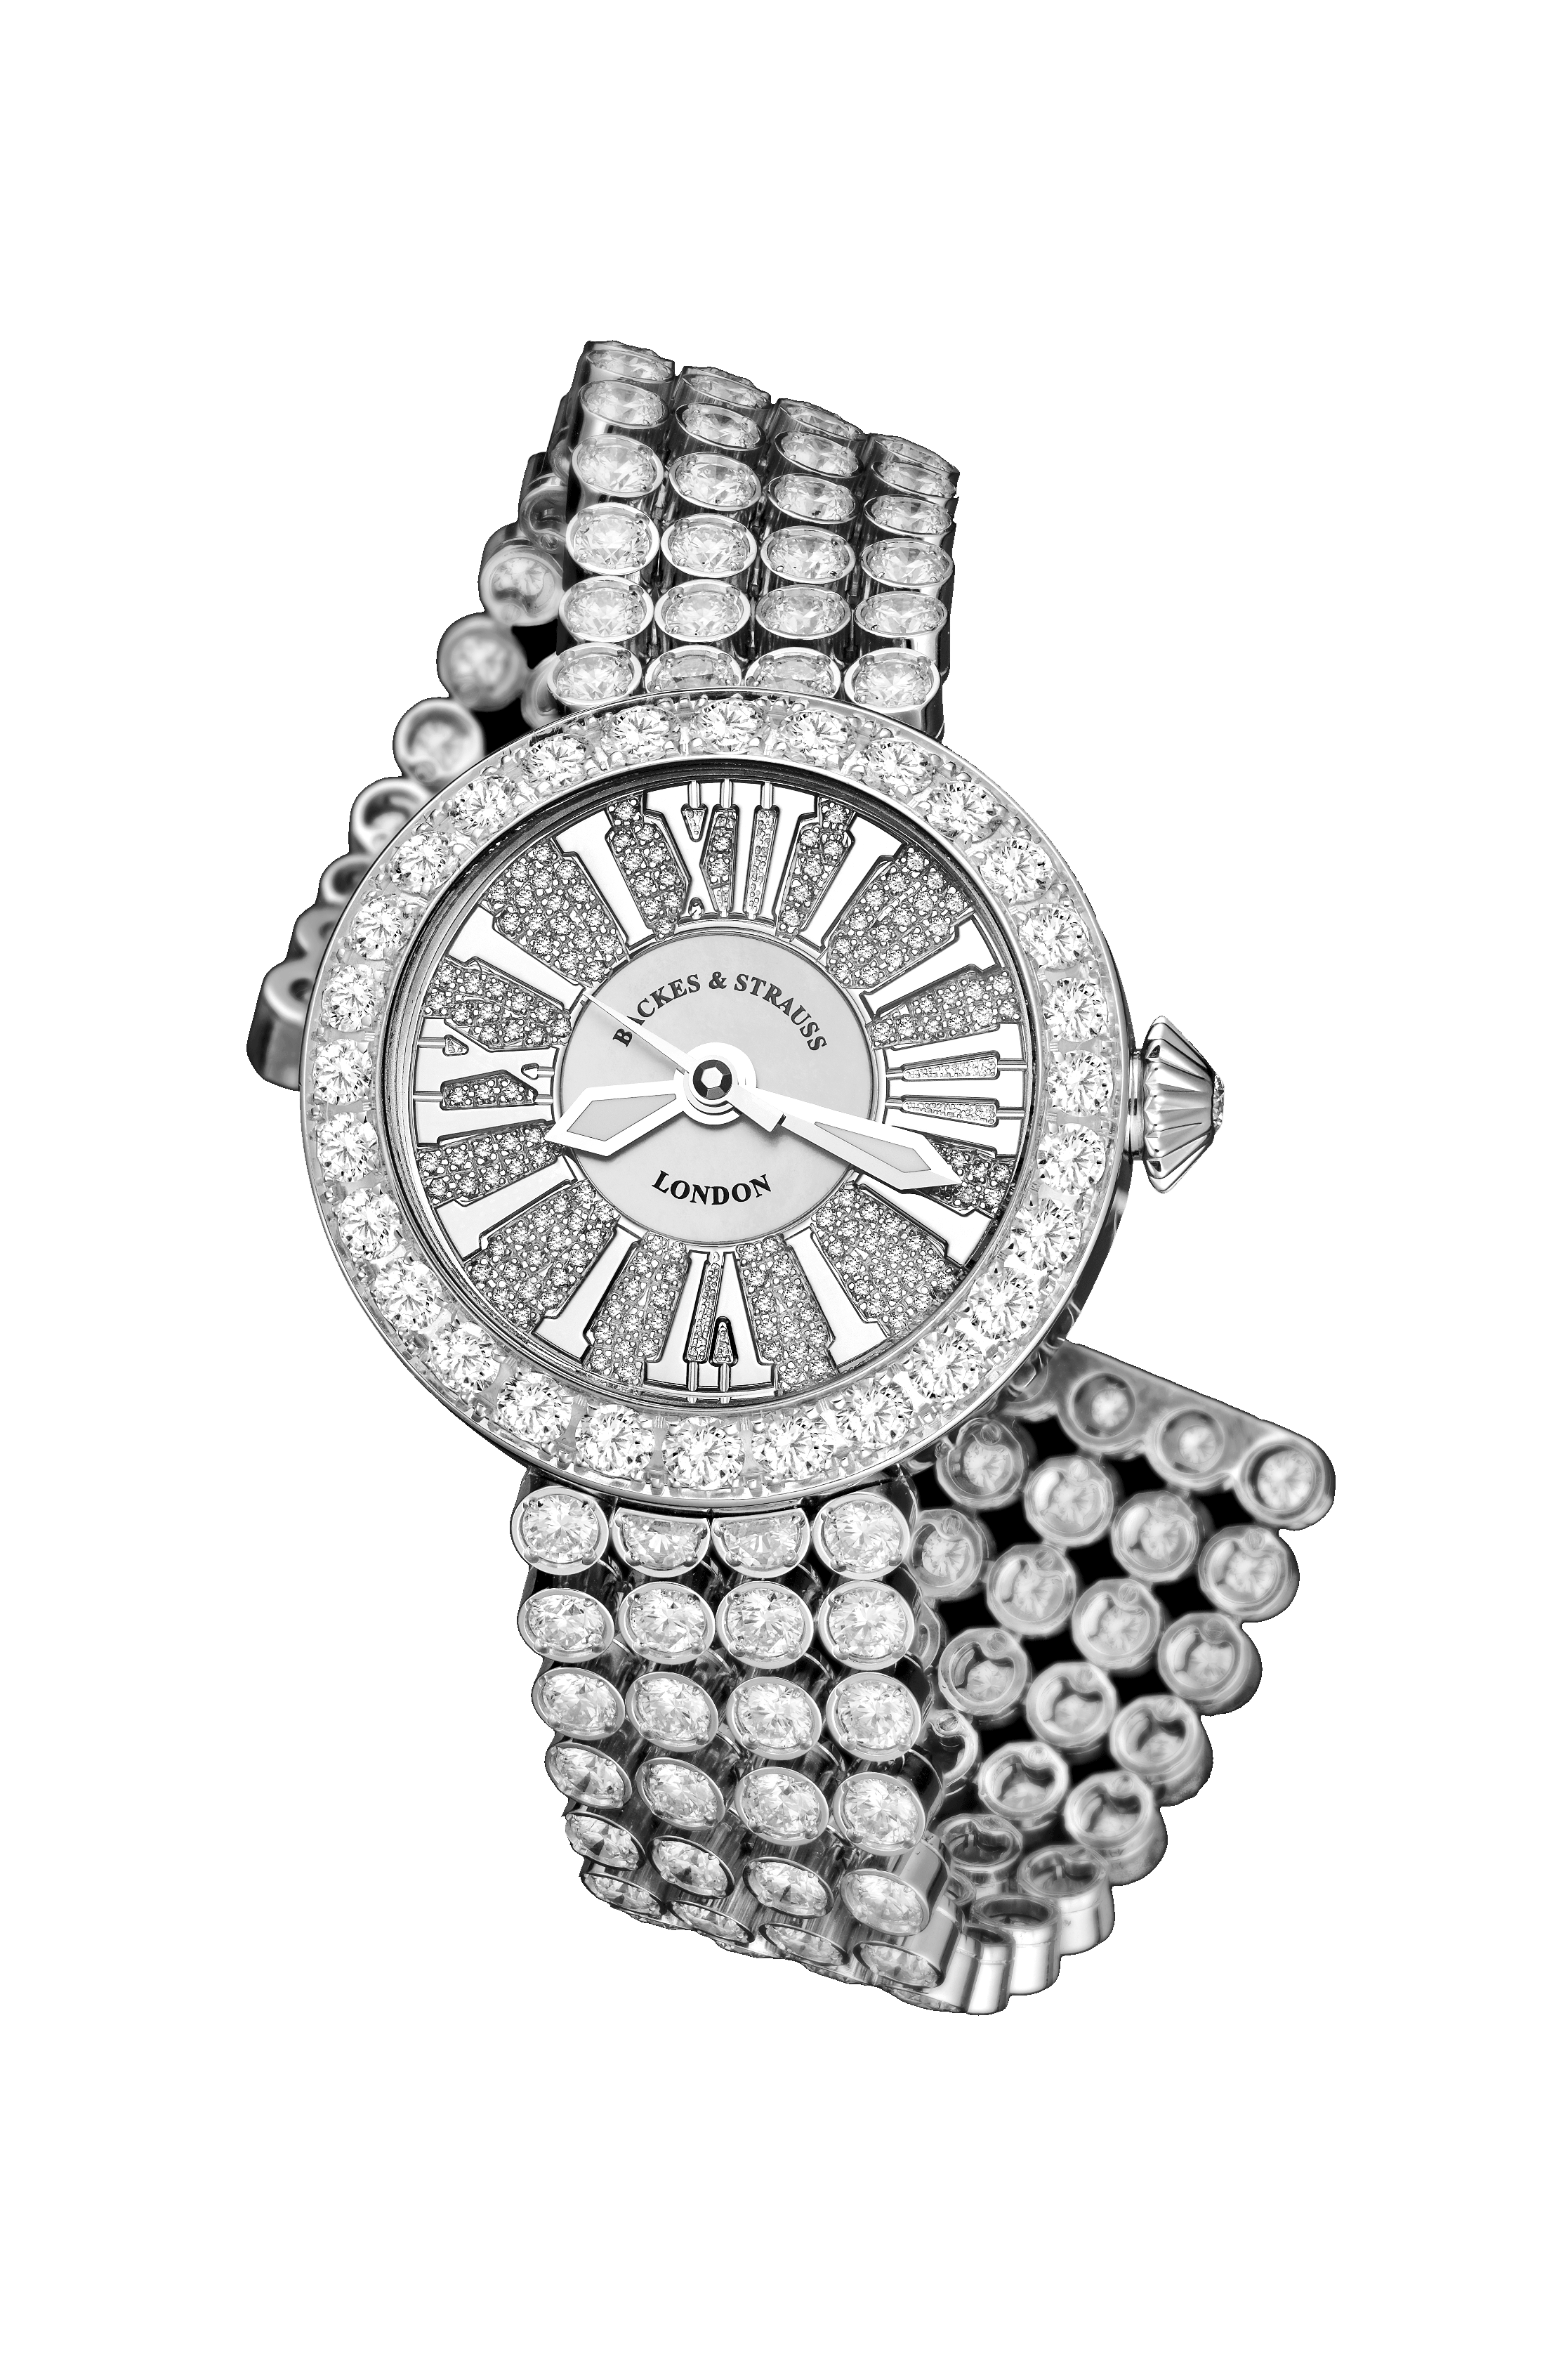 Piccadilly Princess 37 diamond encrusted watch for women